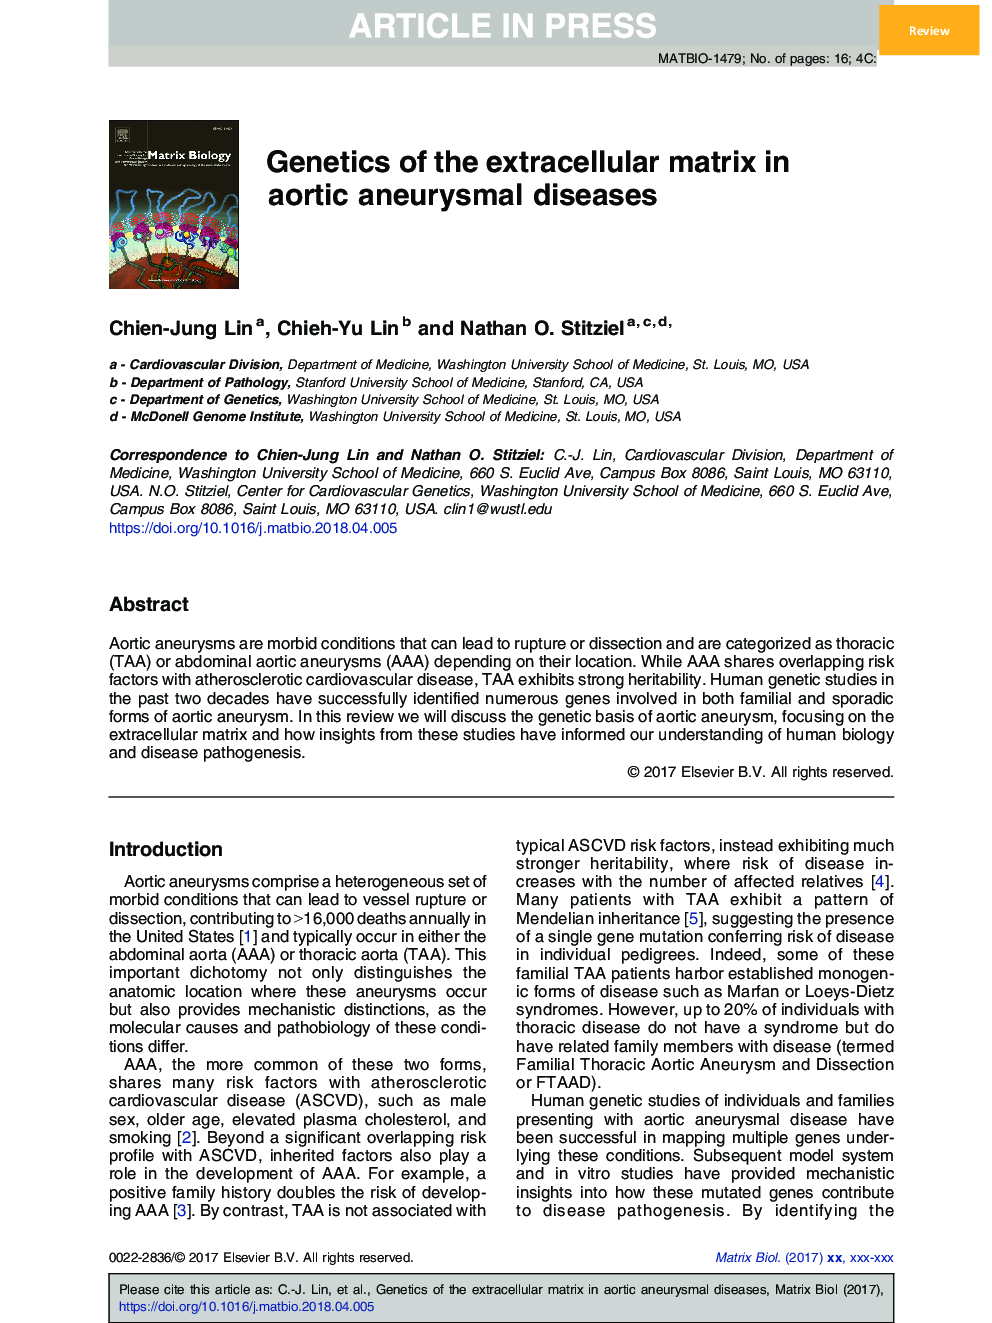 Genetics of the extracellular matrix in aortic aneurysmal diseases